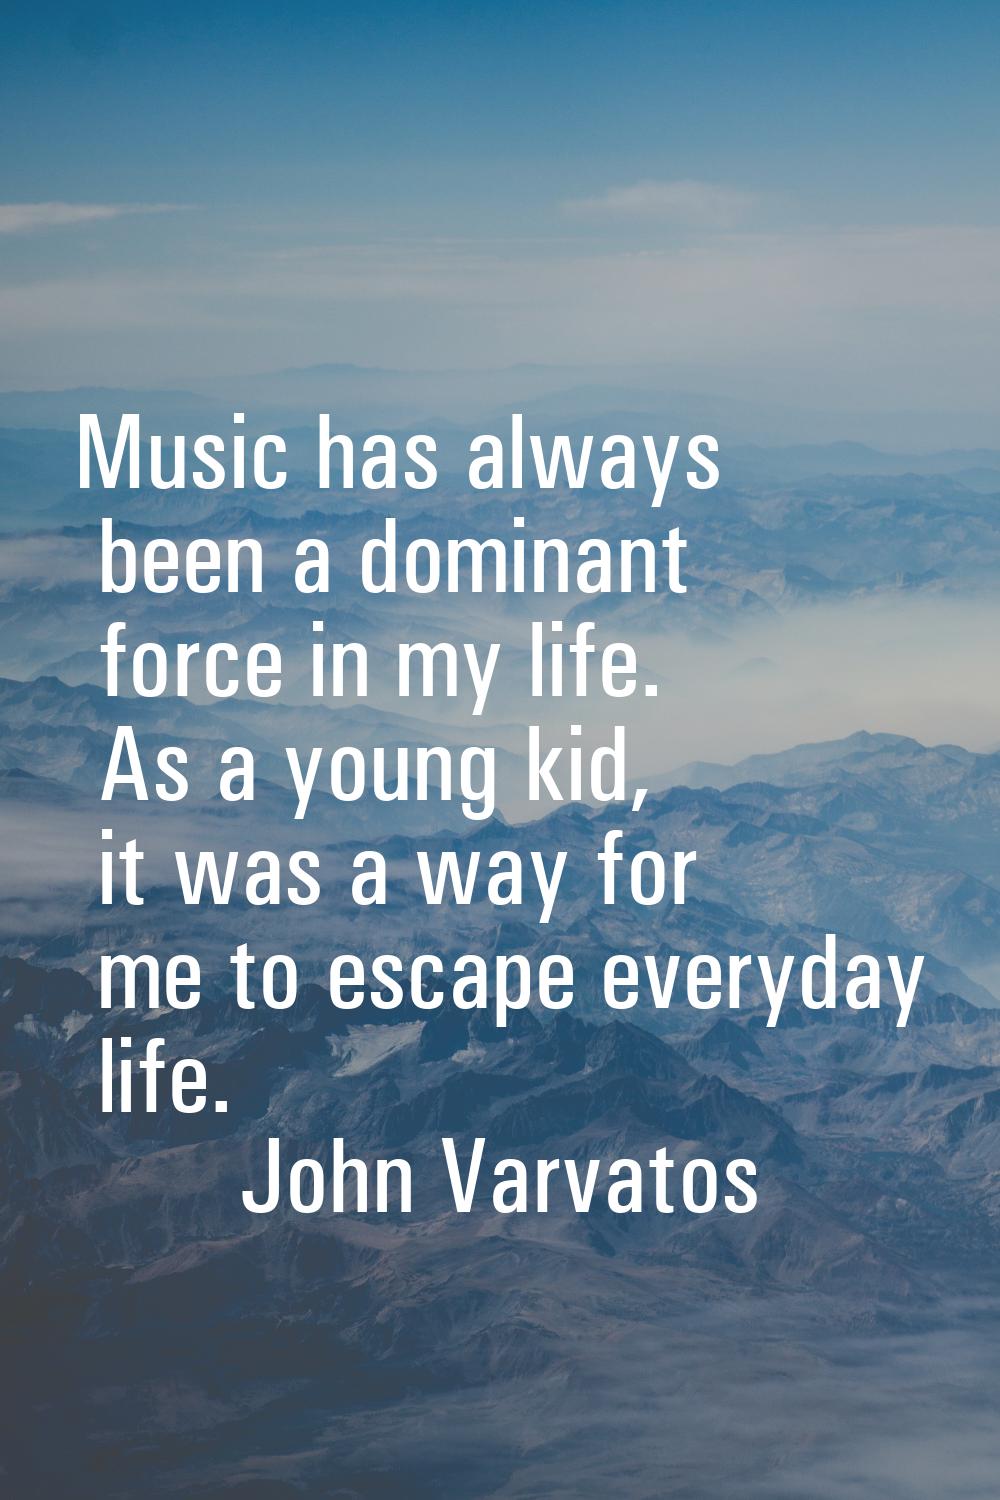 Music has always been a dominant force in my life. As a young kid, it was a way for me to escape ev